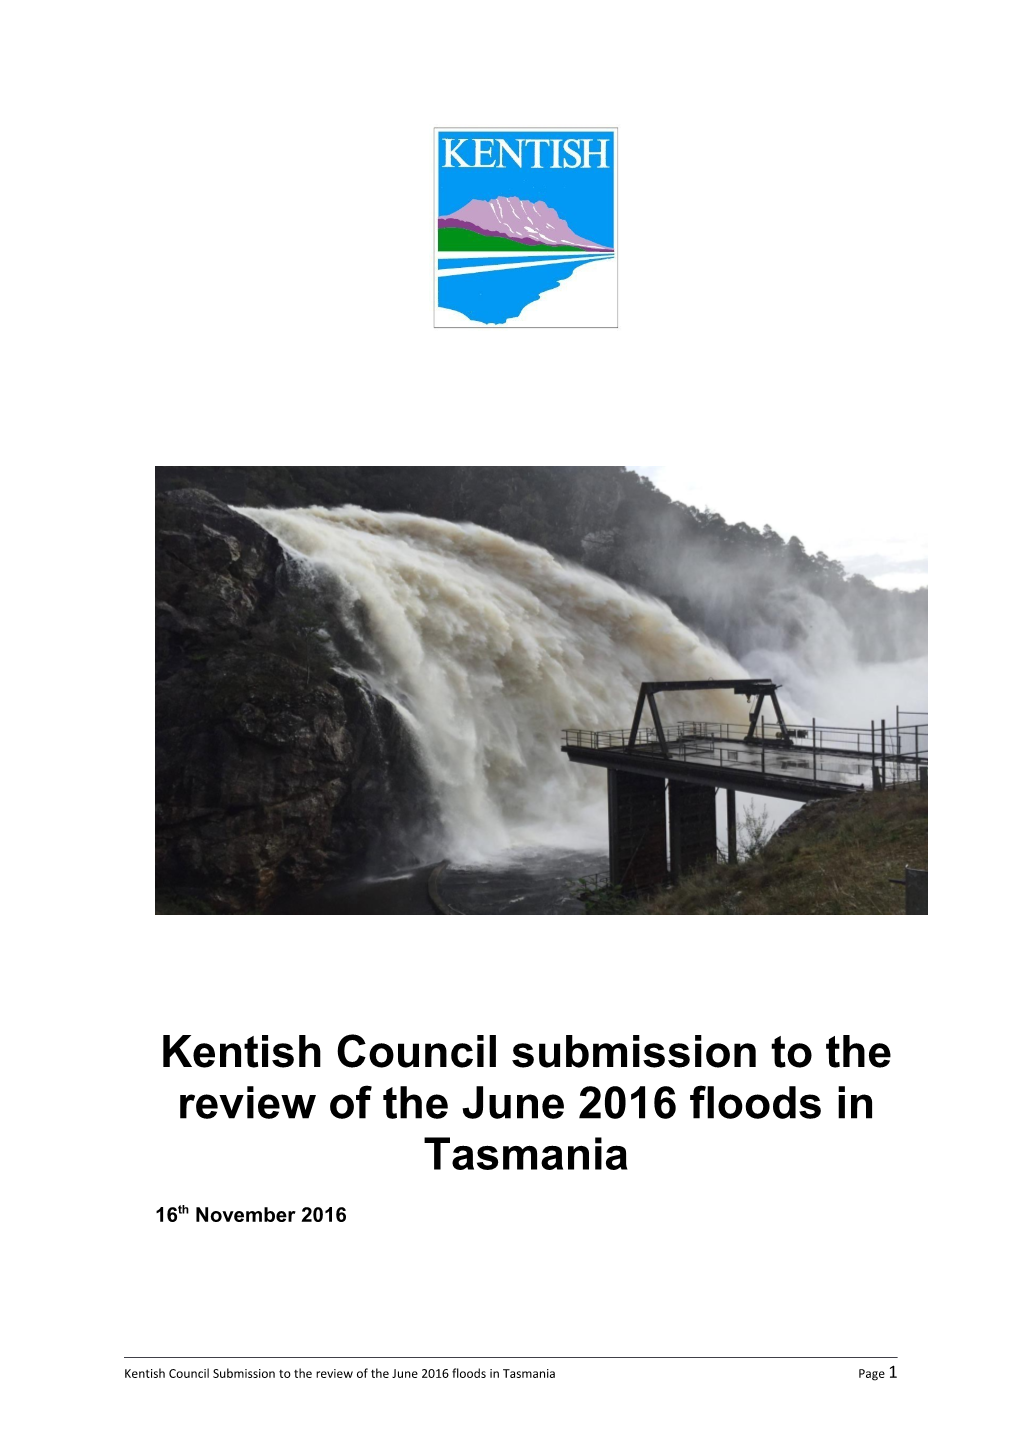 Kentish Council Submission to the Review of the June 2016 Floods in Tasmania